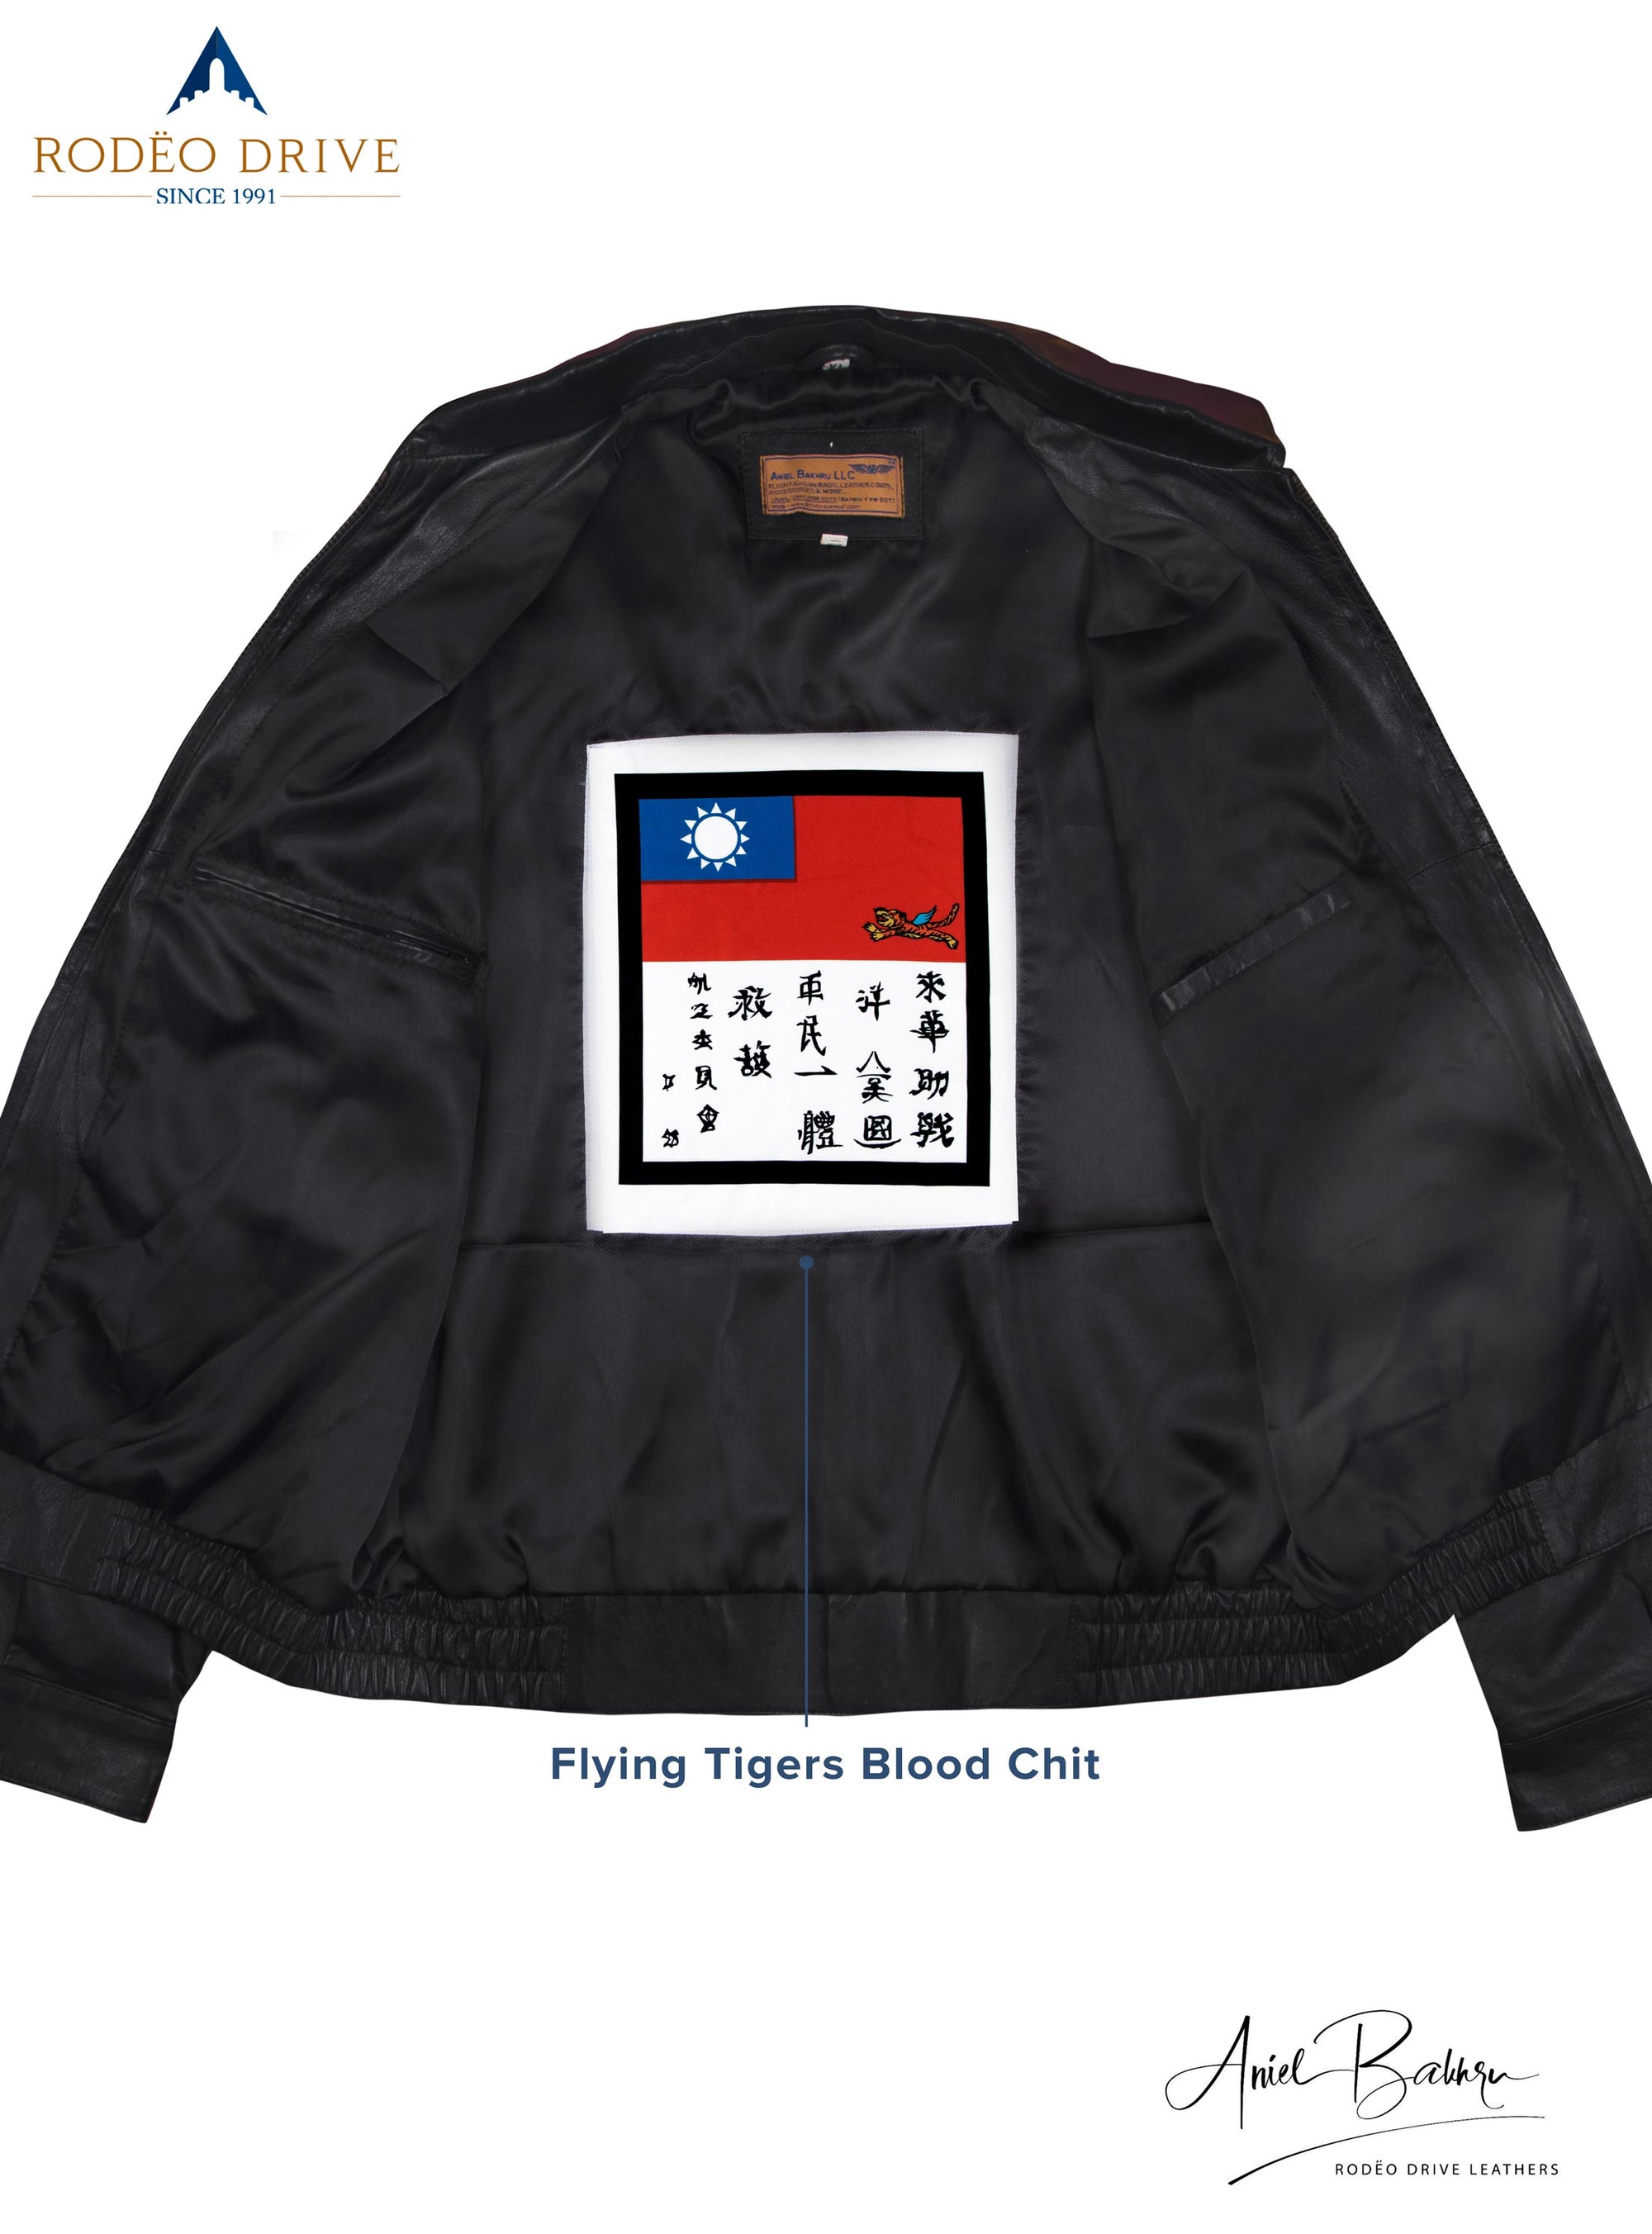 inside image of Bomber jacket. Flying tigers Blood chit is sewed inside.